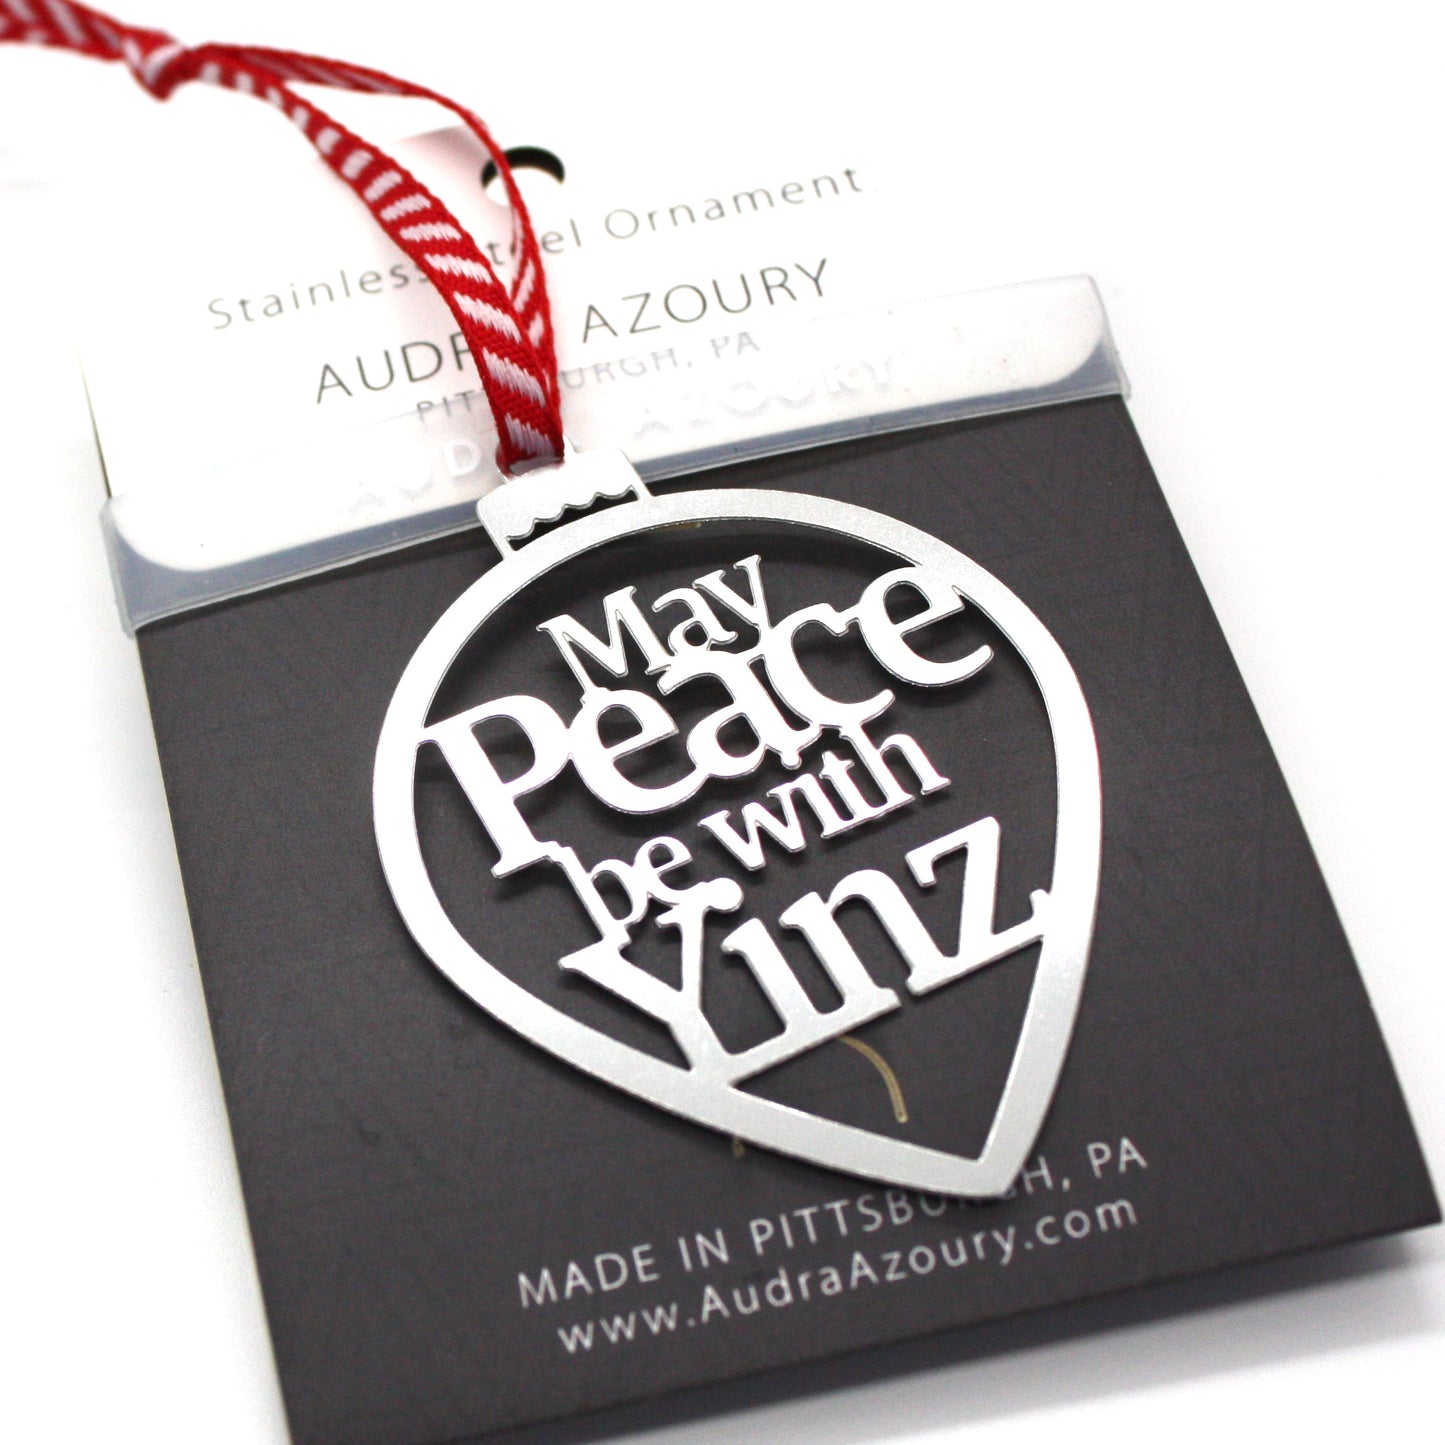 Ornament | May Peace be with Yinz